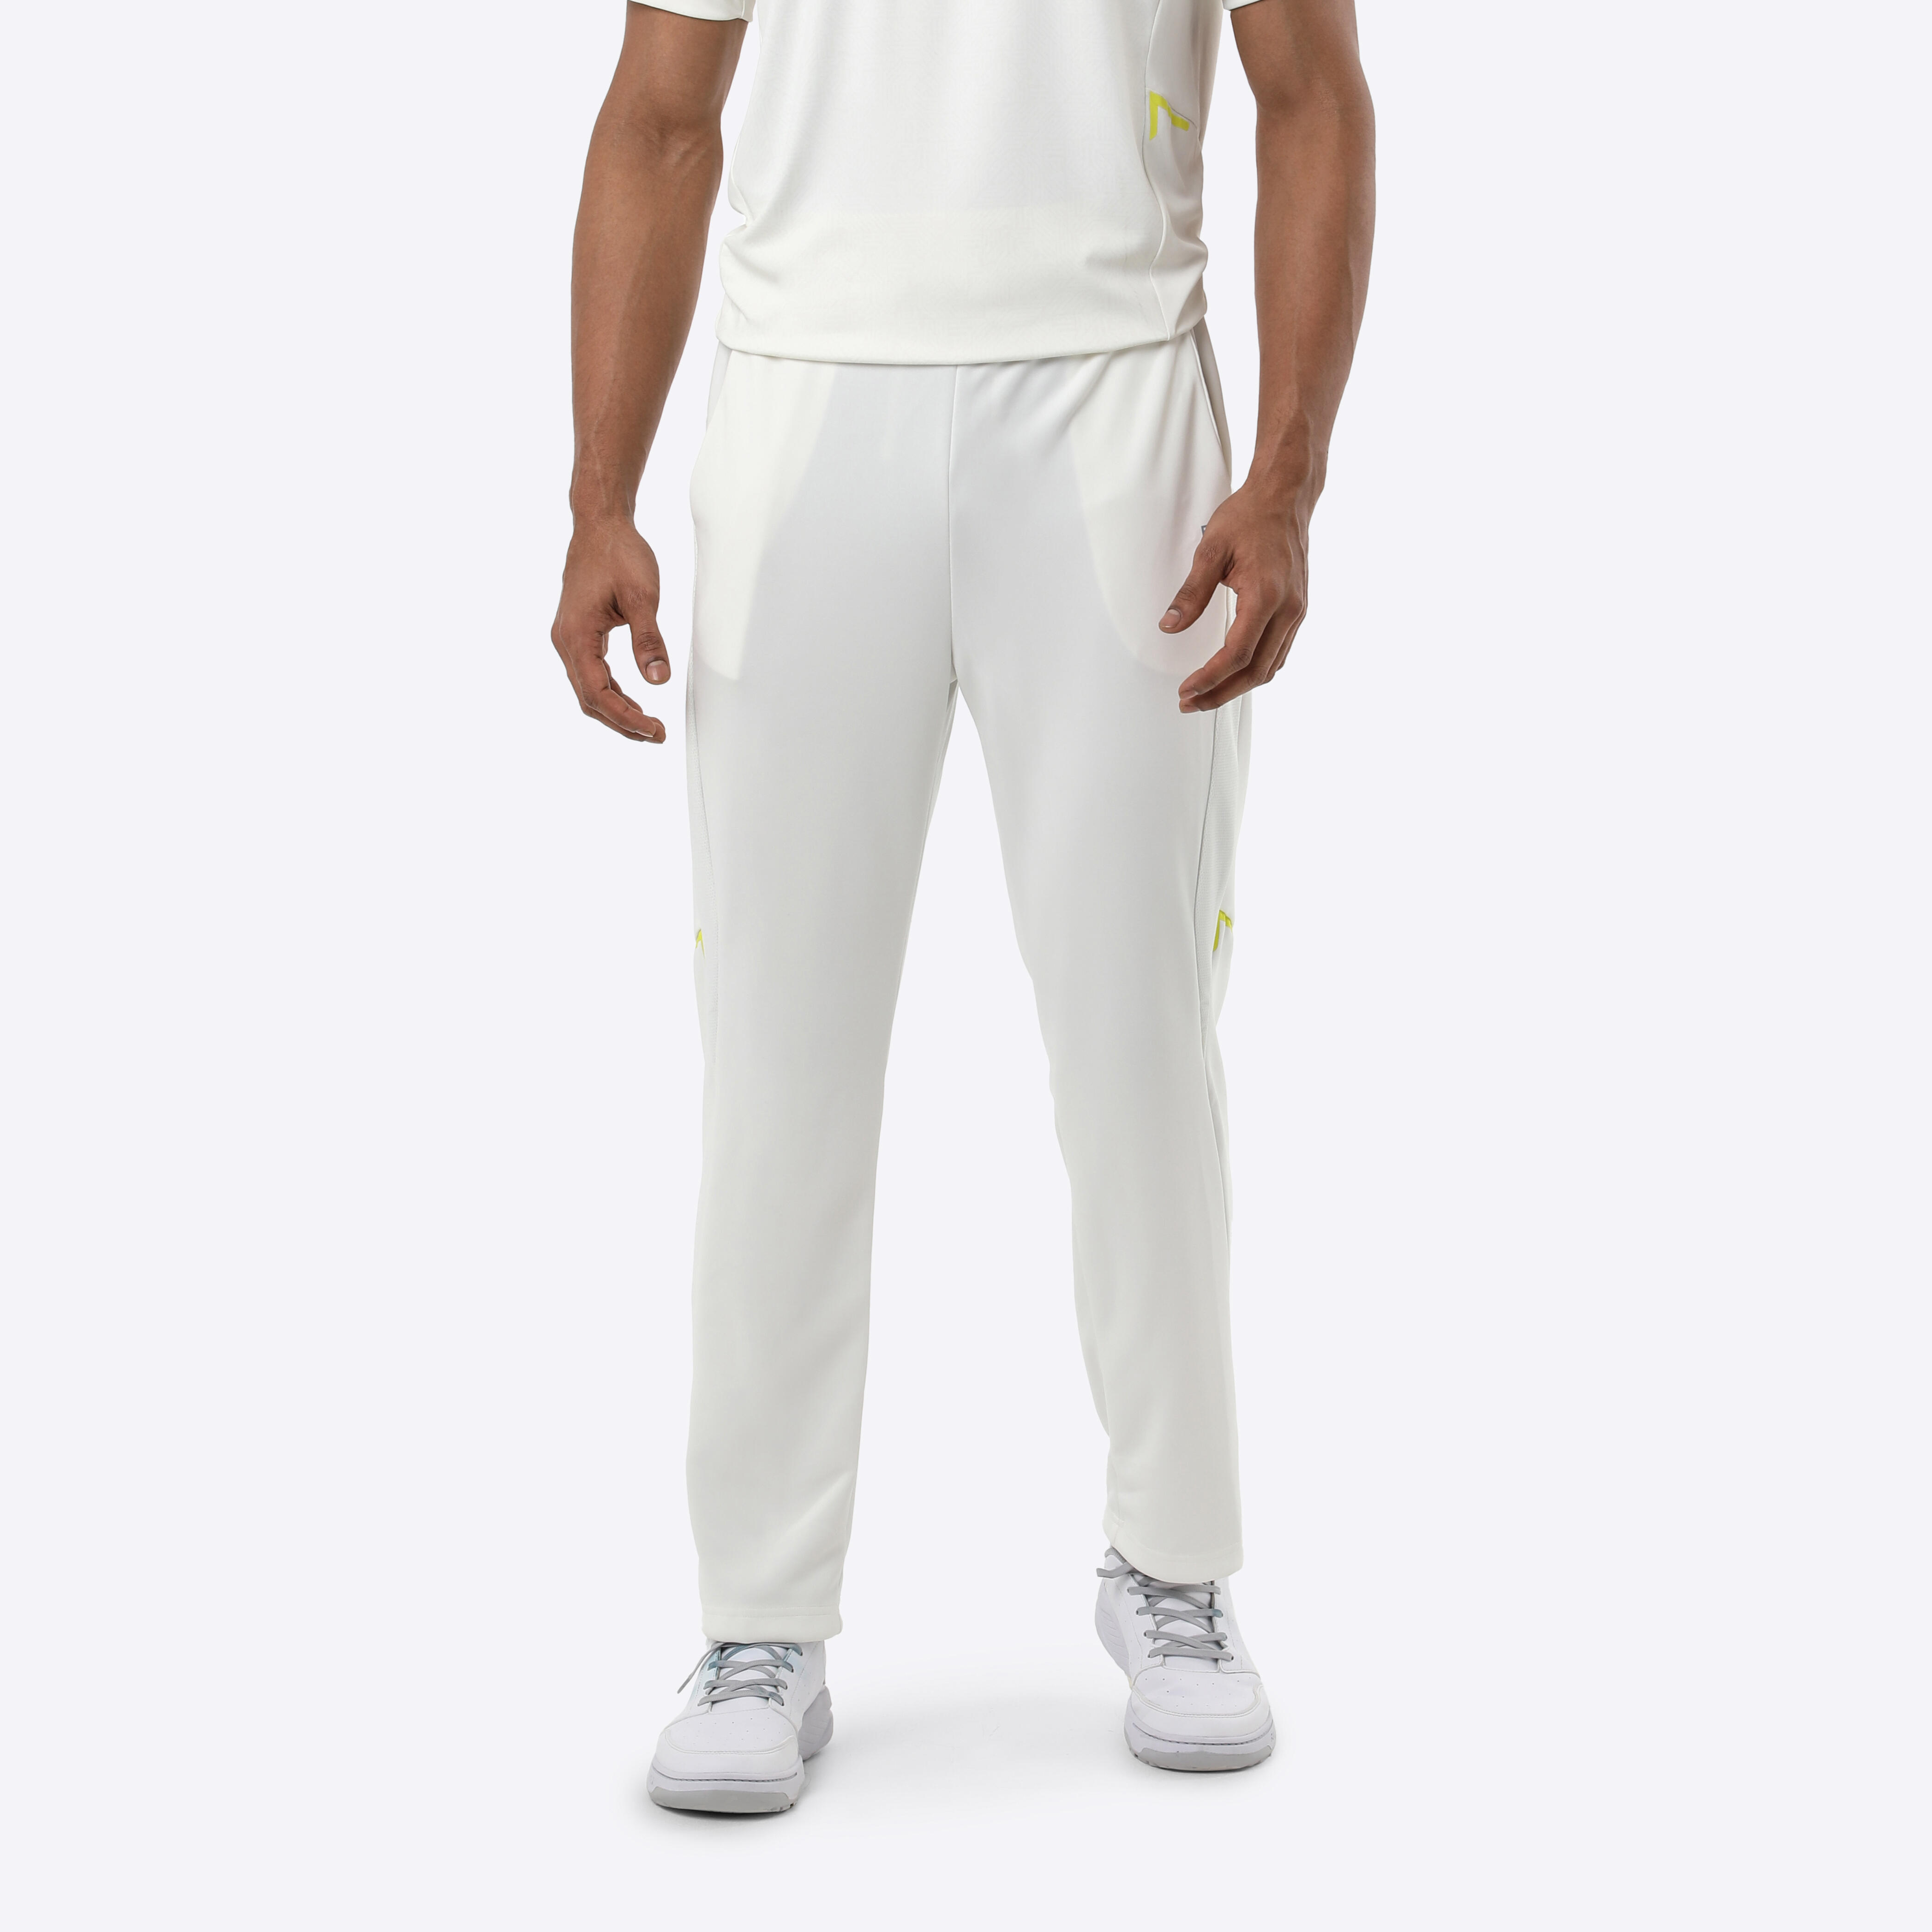 MENS CRICKET STRAIGHT FIT TROUSER CTS 500 DARK BLUE